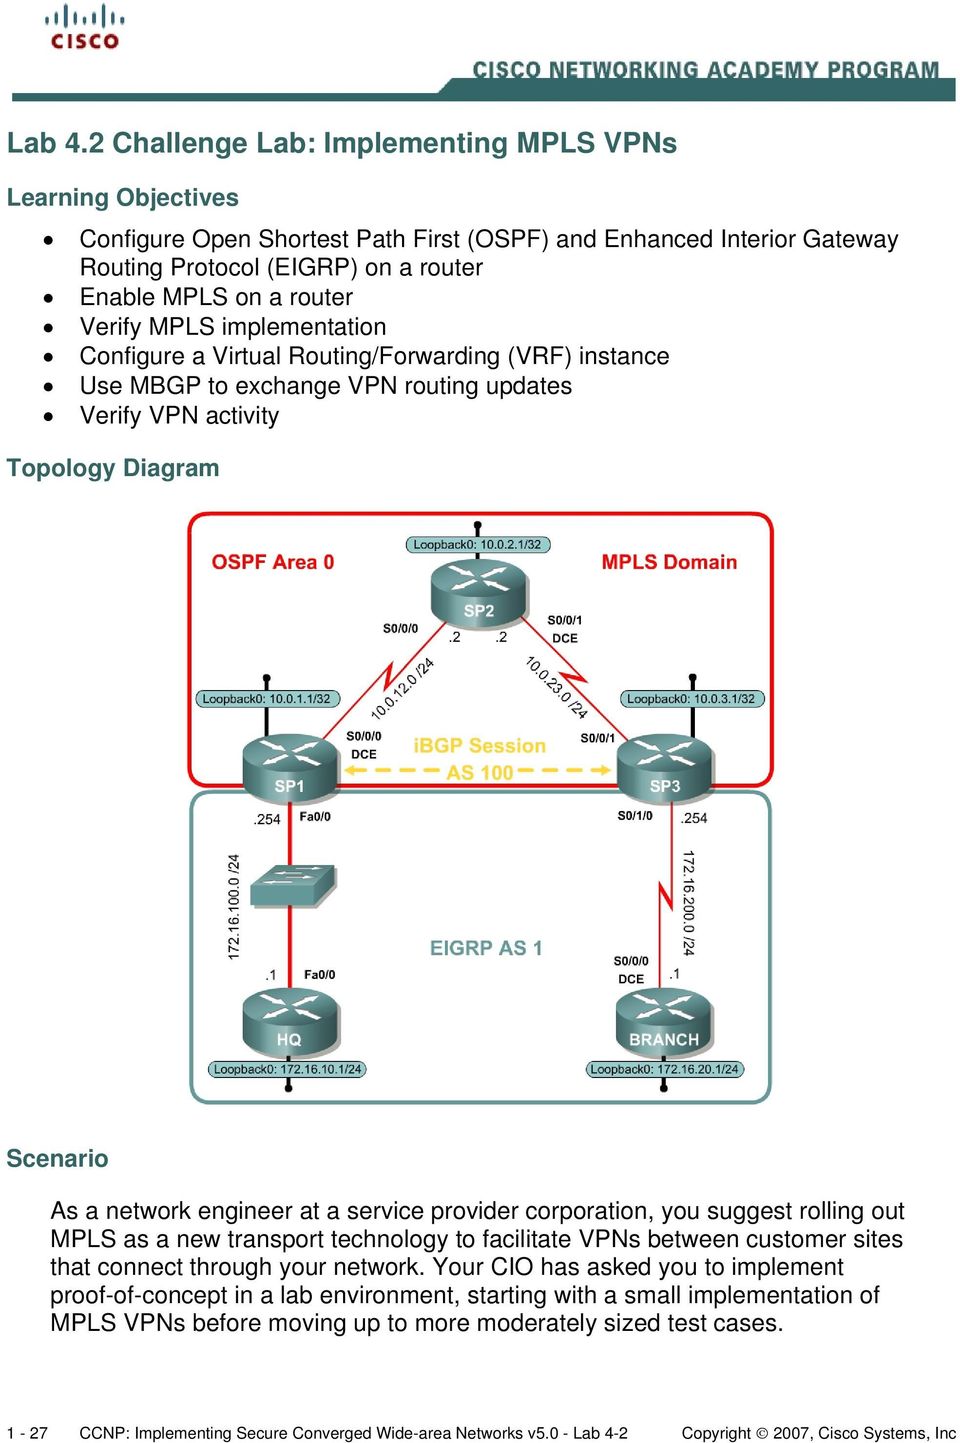 MPLS implementation Configure a Virtual Routing/Forwarding (VRF) instance Use MBGP to exchange VPN routing updates Verify VPN activity Topology Diagram Scenario As a network engineer at a service